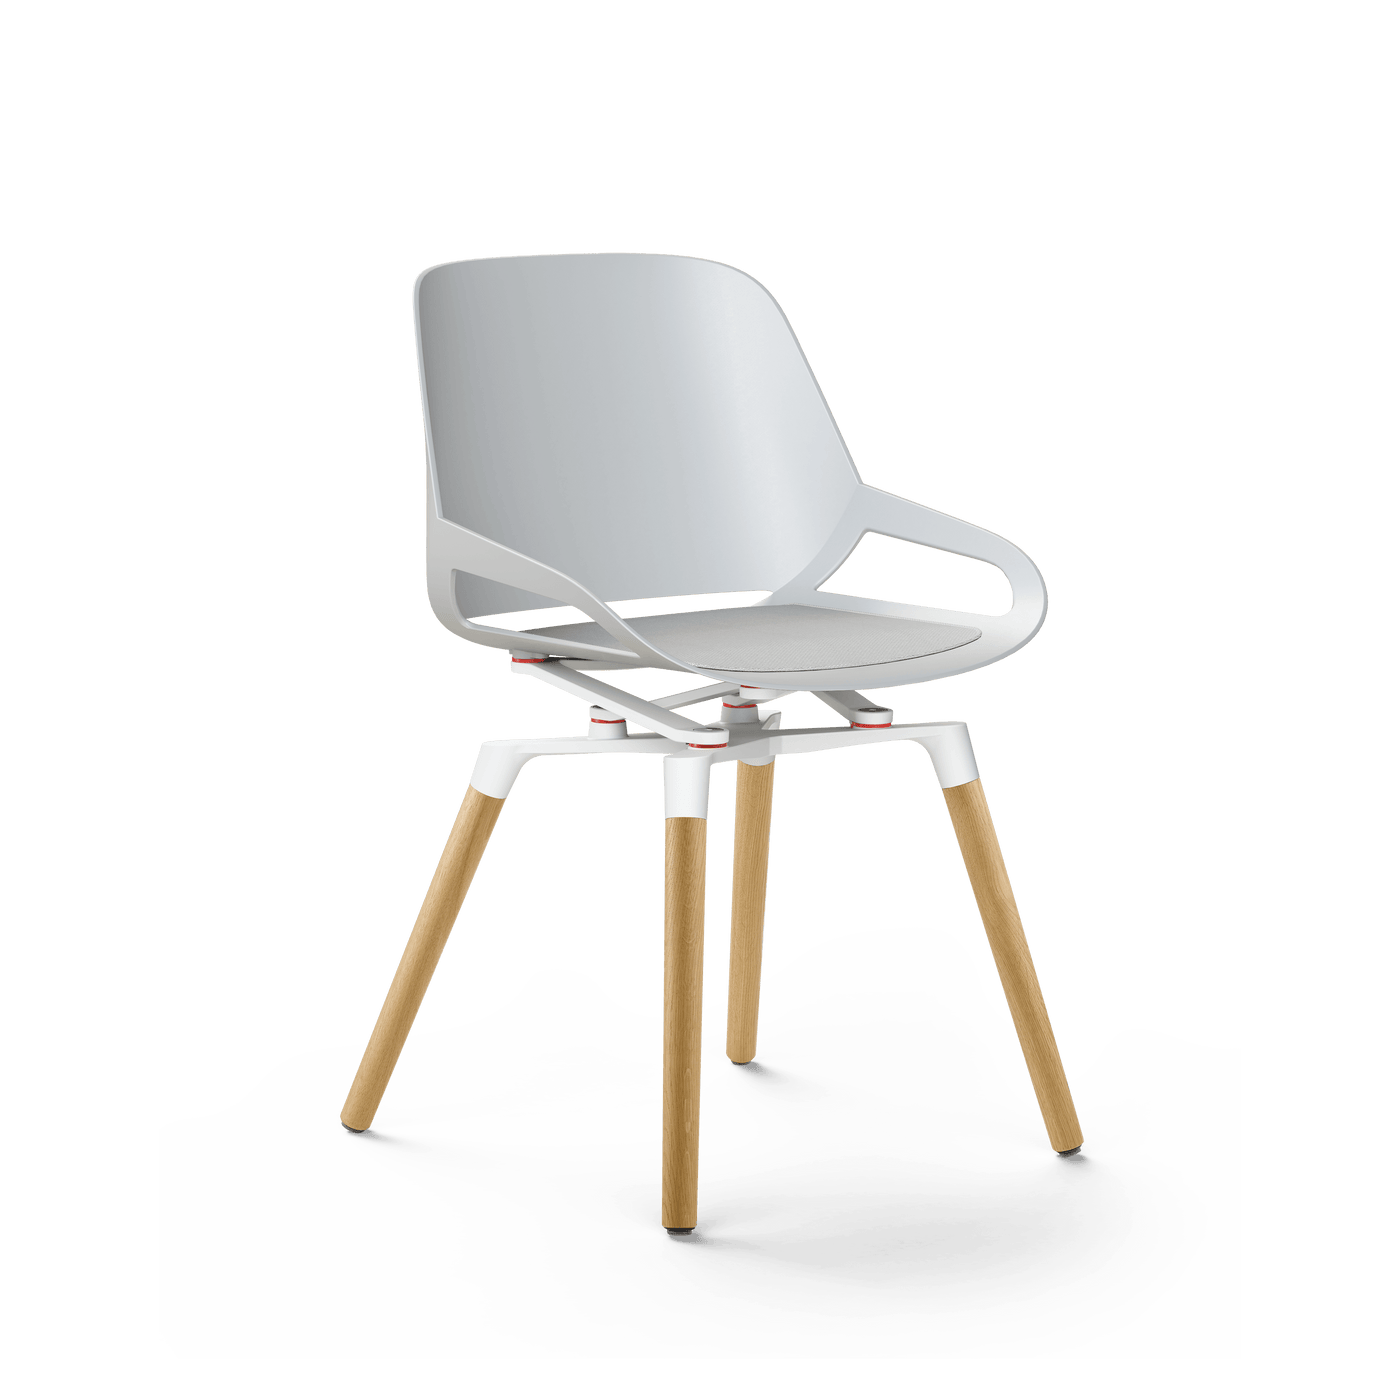 Design chair Aeris Numo with wooden legs, white shell and white kinematics.